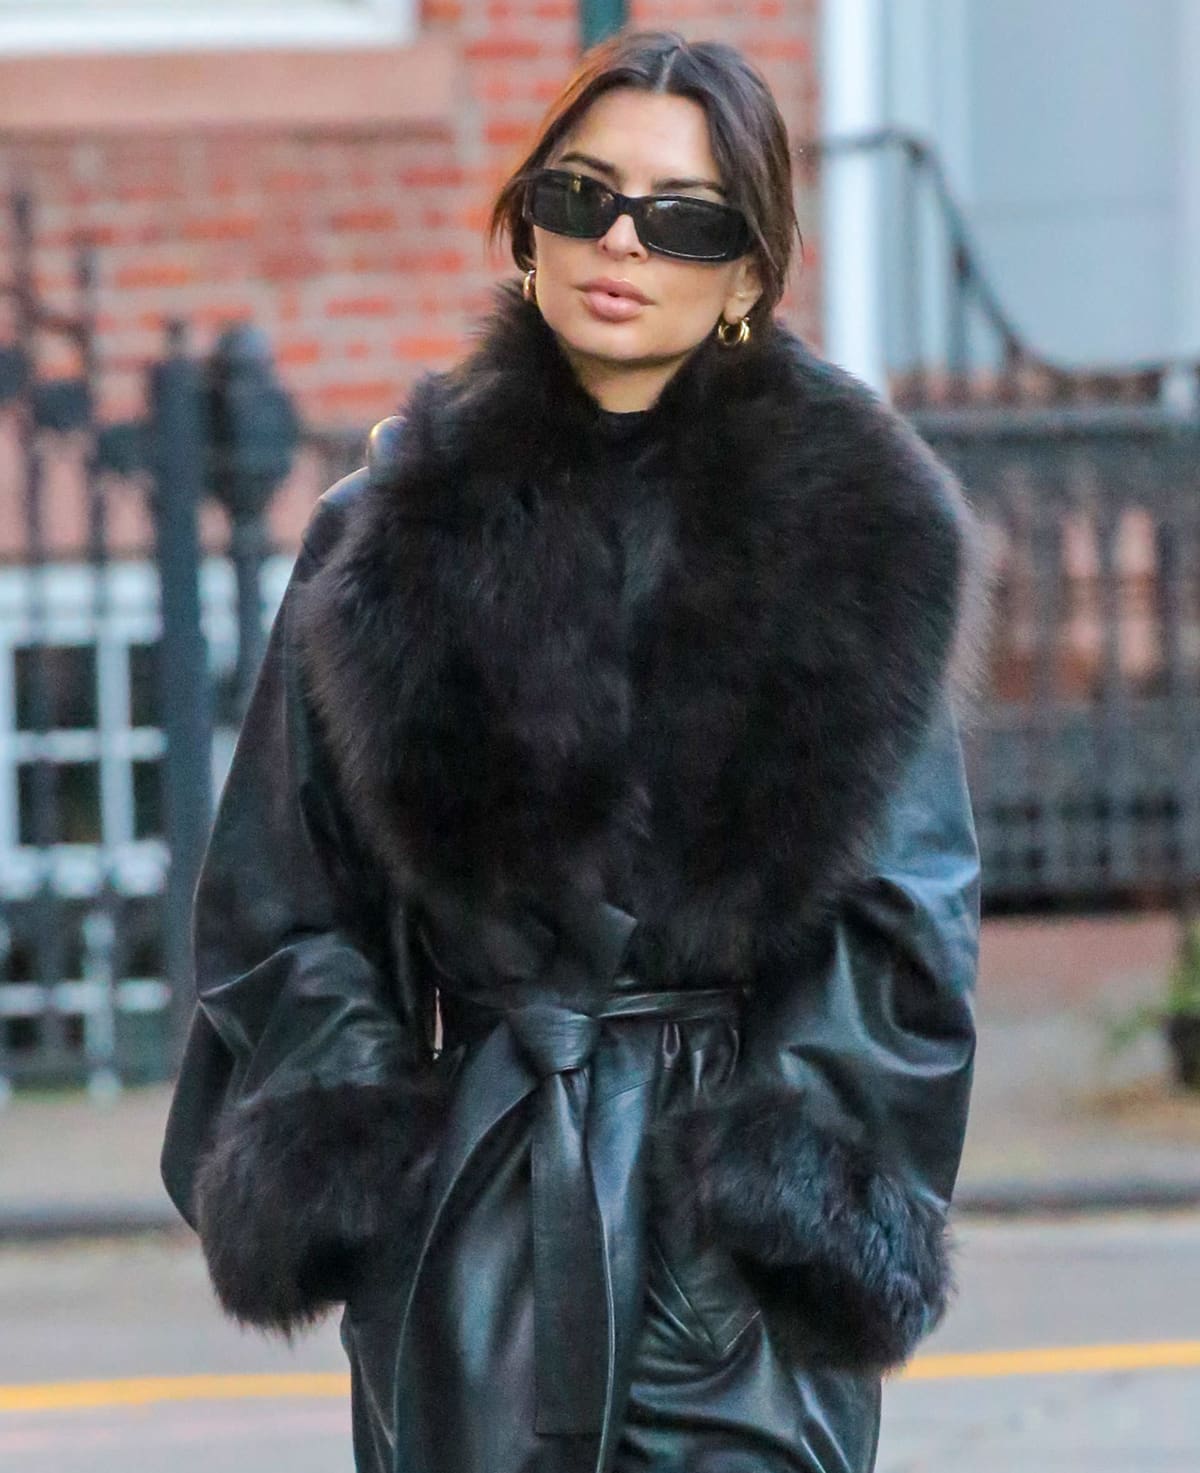 Emily Ratajkowski adds glitz to her all-black winter outfit with thick gold hoops and shields her eyes with Dolce & Gabbana Edition sunnies